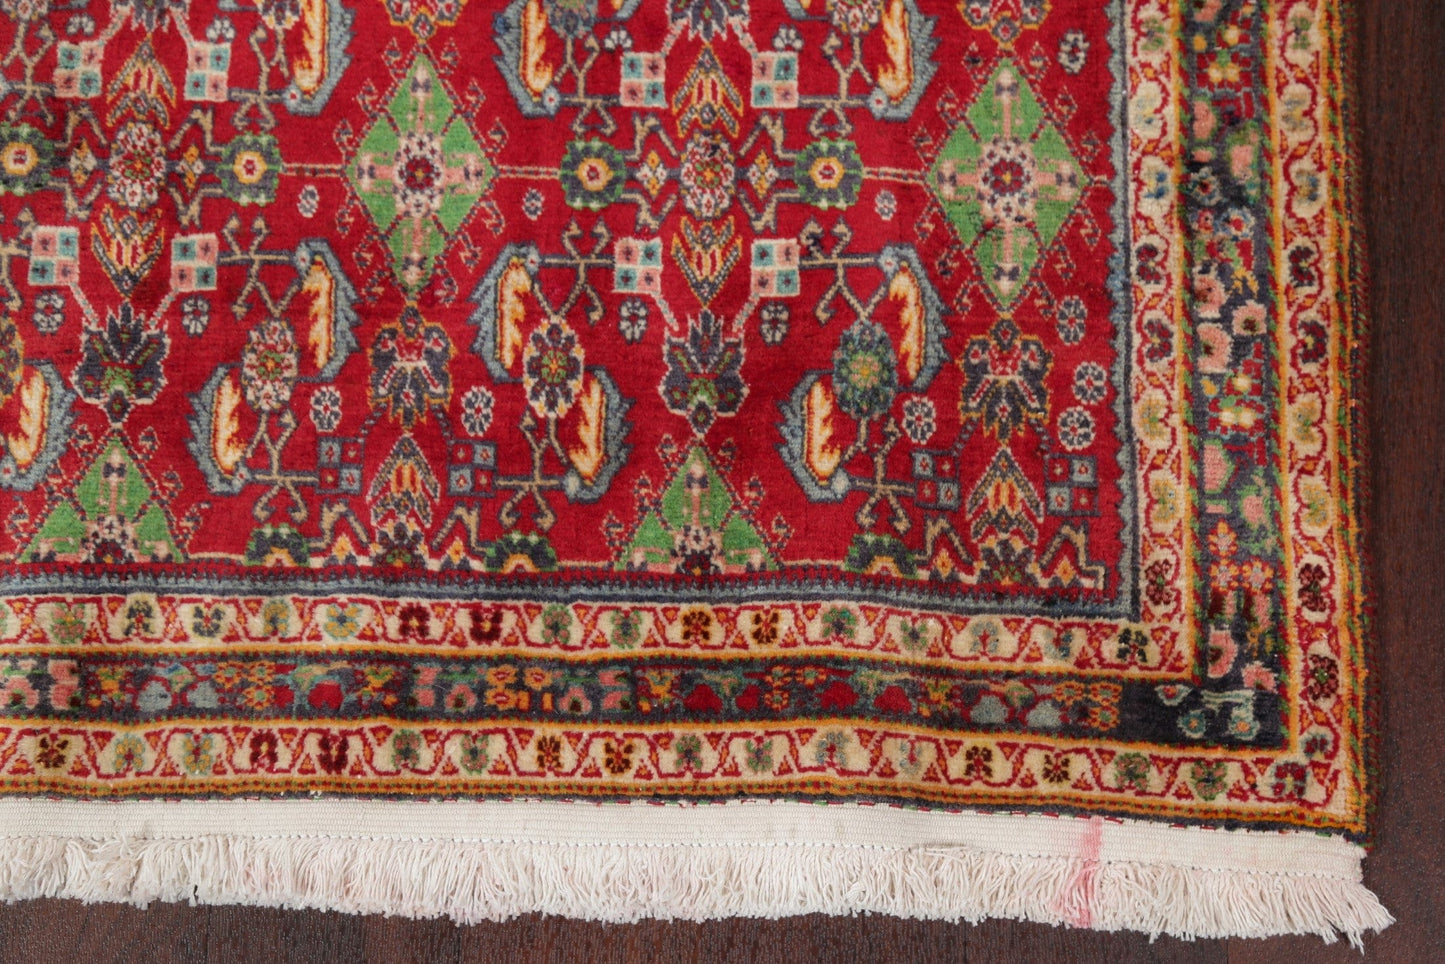 Vegetable Dye Red Kashkoli Persian Hand-Knotted 4x7 Wool Area Rug